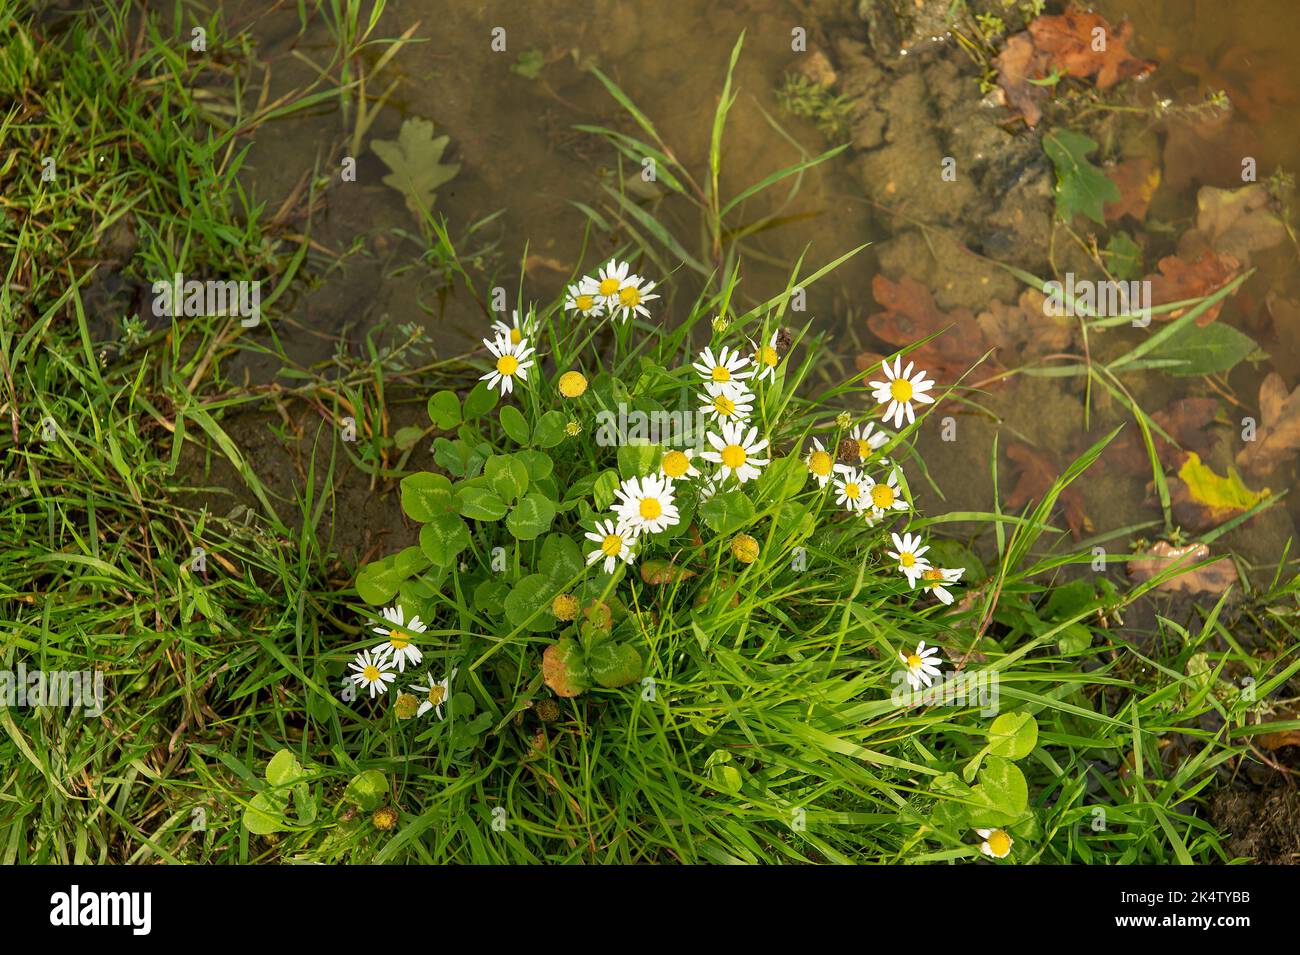 grass and daisies and weeds Stock Photo